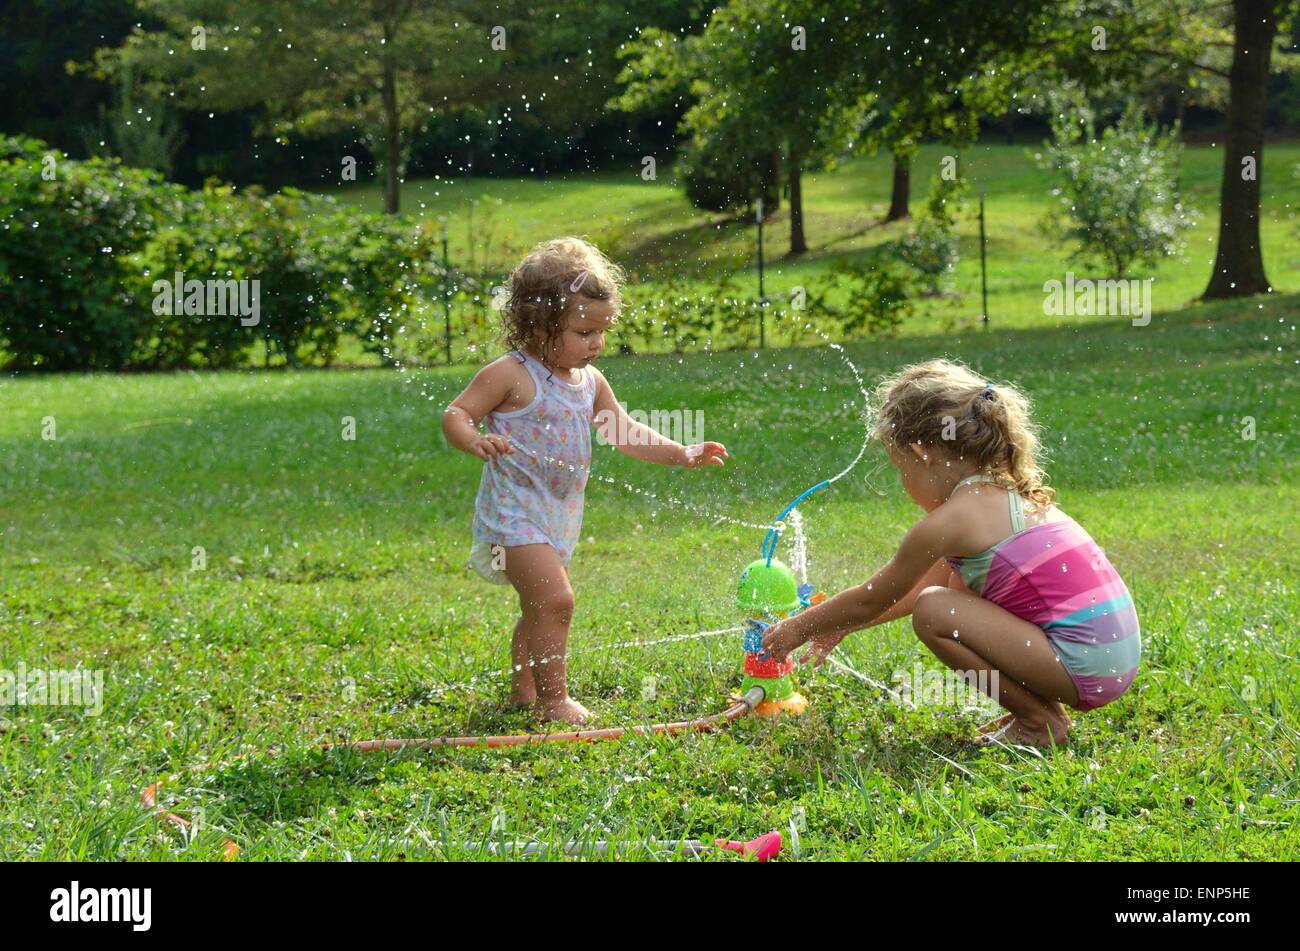 Two young girls, a toddler and a pre-schooler, playing with a toy water sprinkler.  Water spraying all around the girls Stock Photo